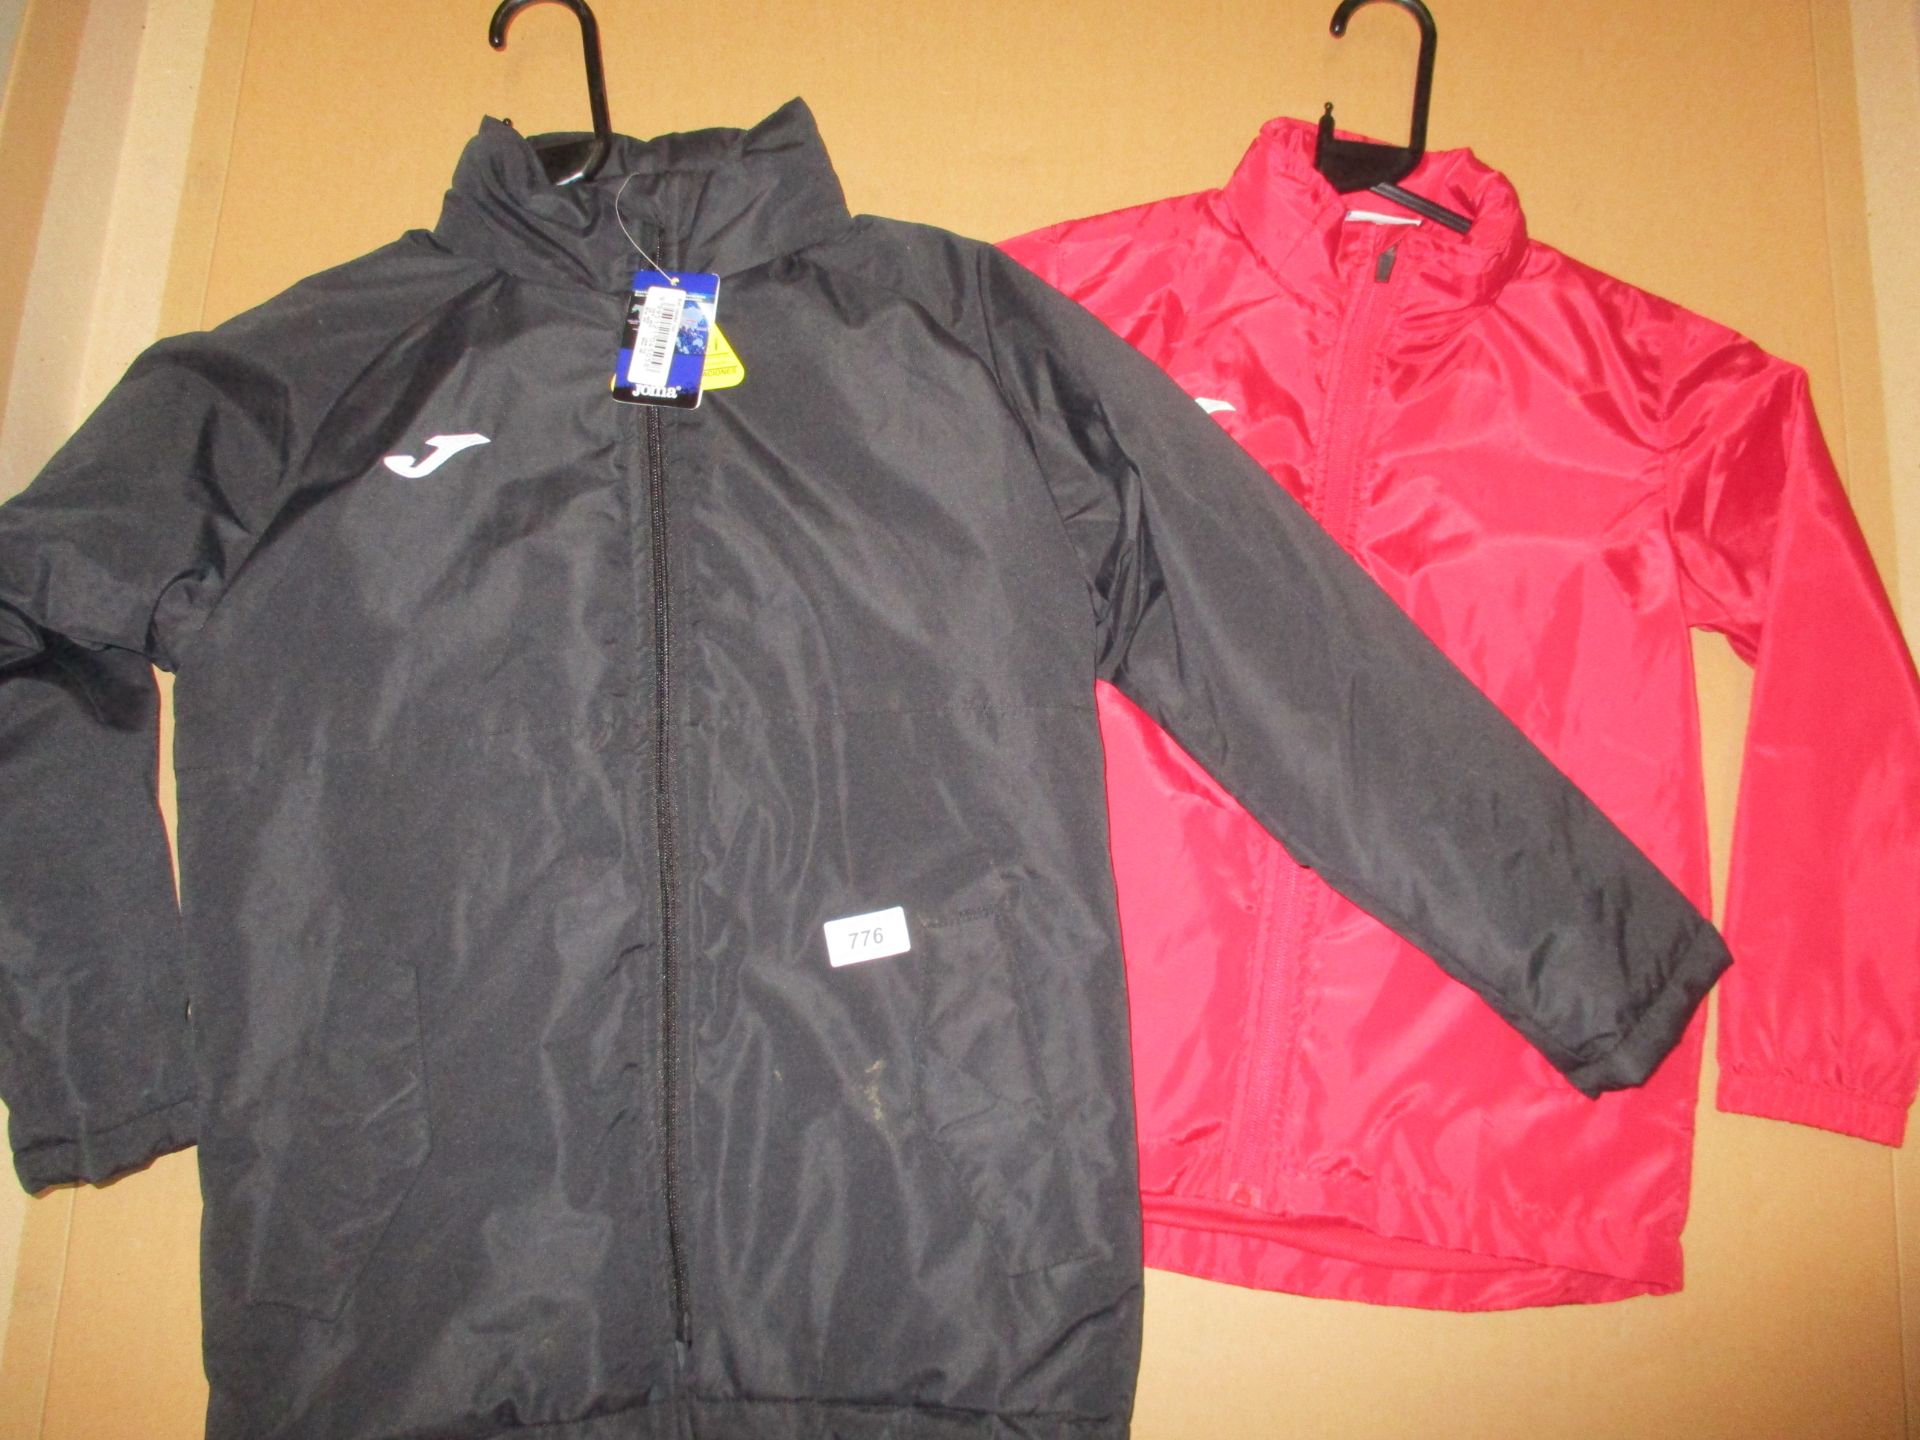 2 assorted jackets by Joma sizes 4XS and